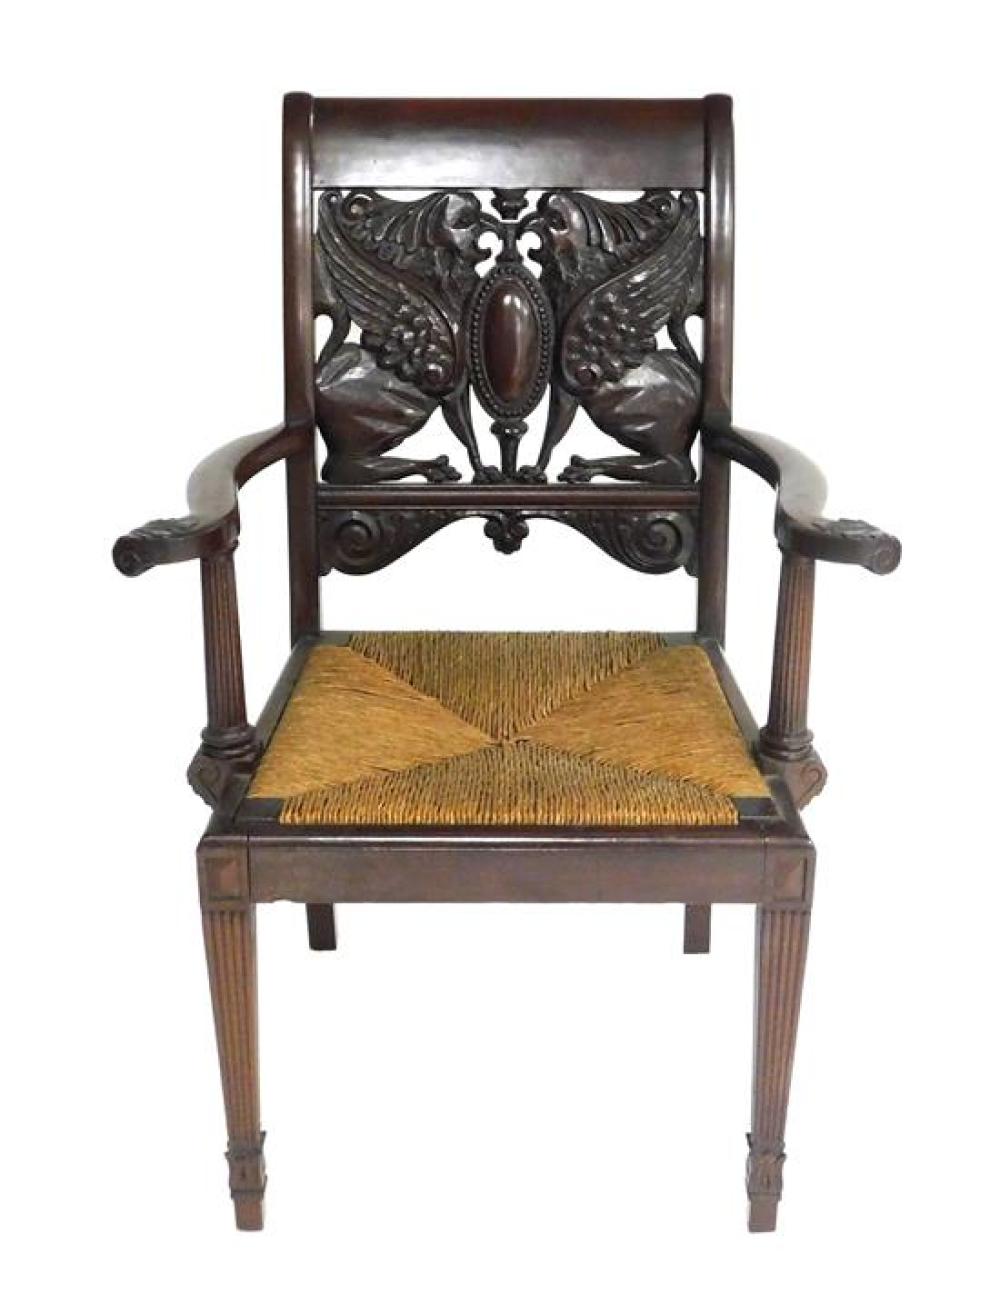 ARMCHAIR WITH ORNATE CARVED GRIFFIN